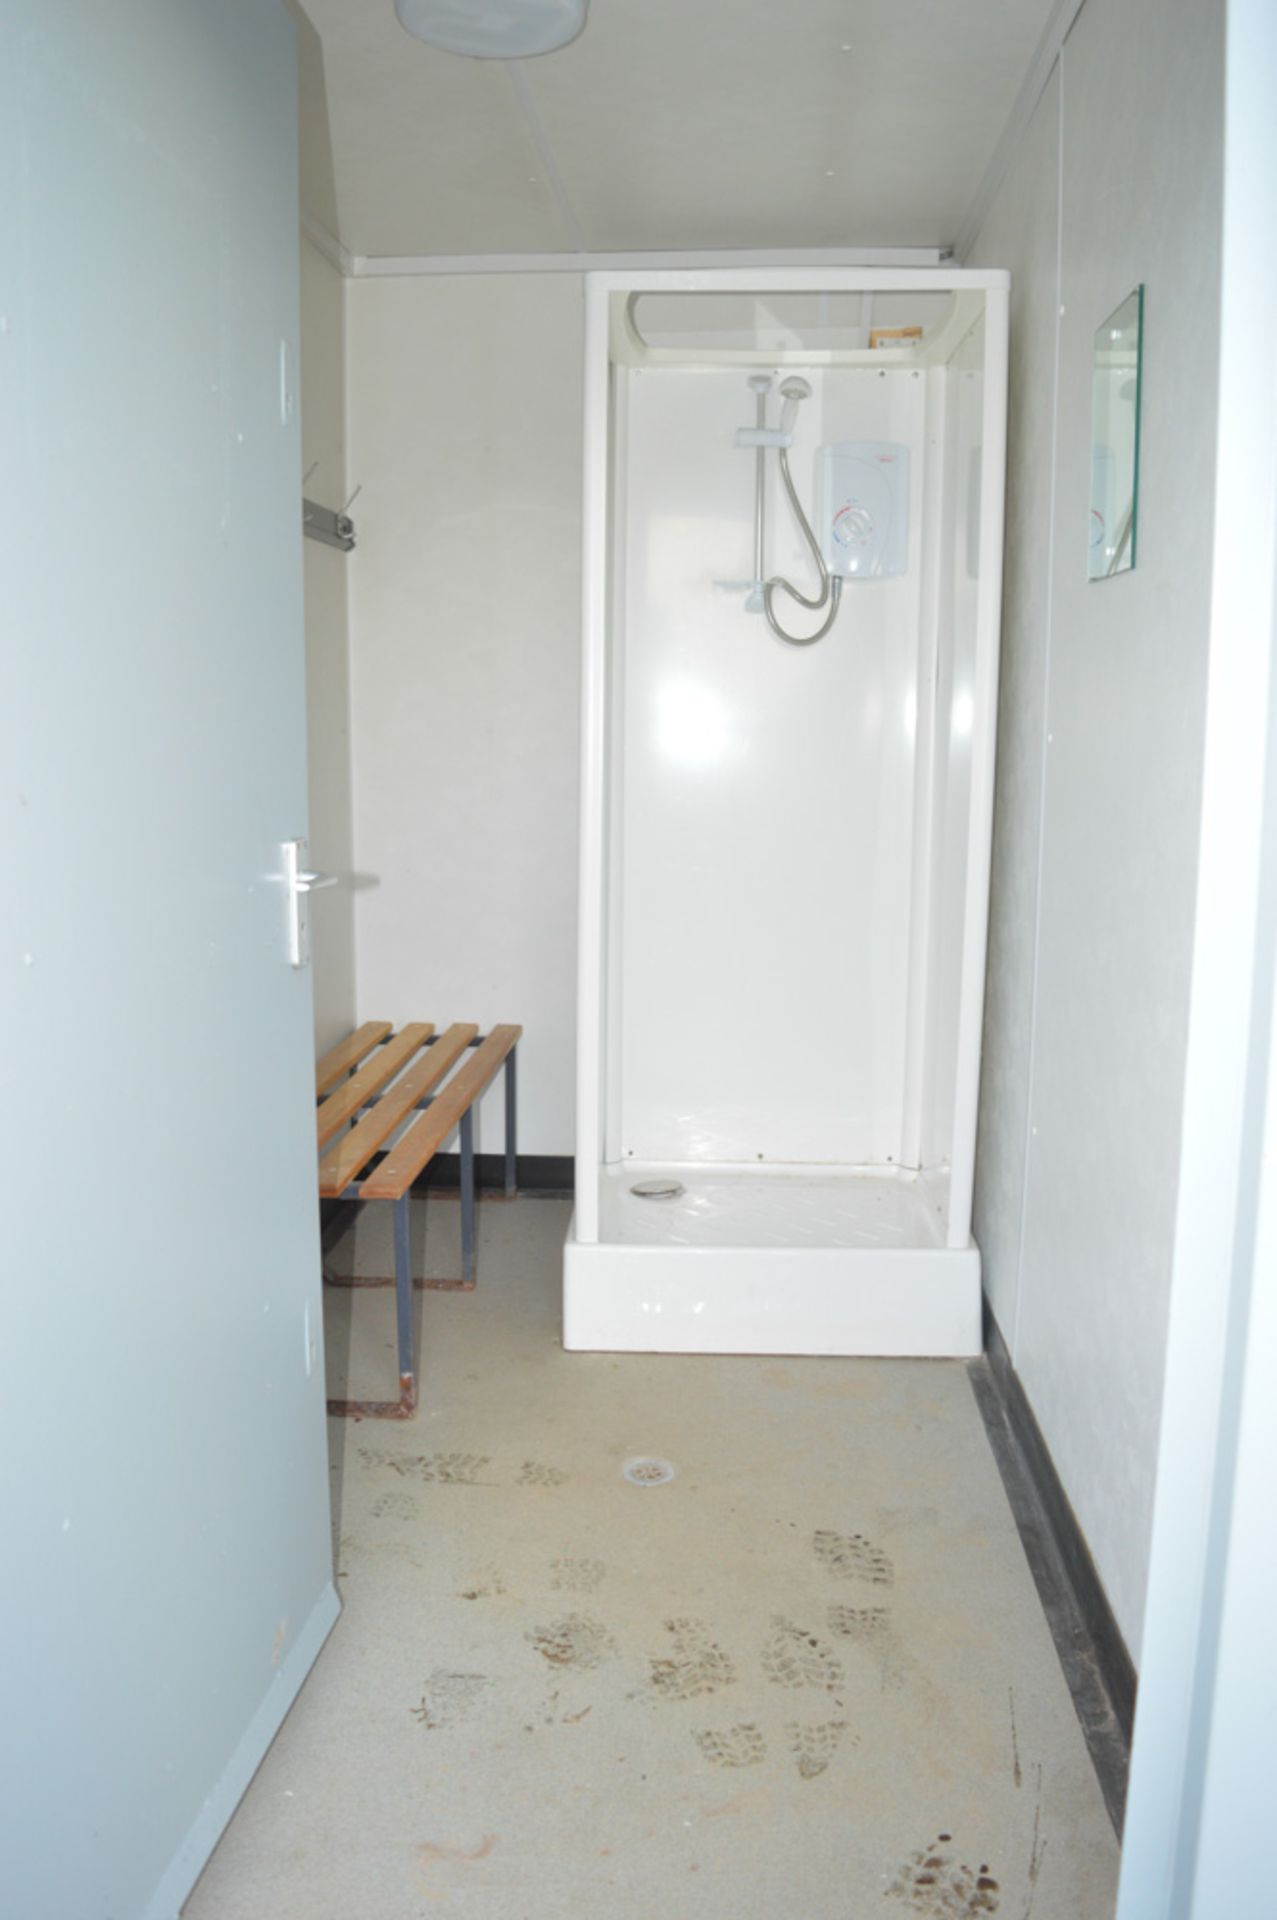 32ft x 9ft toilet and shower block site unit  Comprising of 3 rooms, toilets and shower  C/w keys in - Image 9 of 9